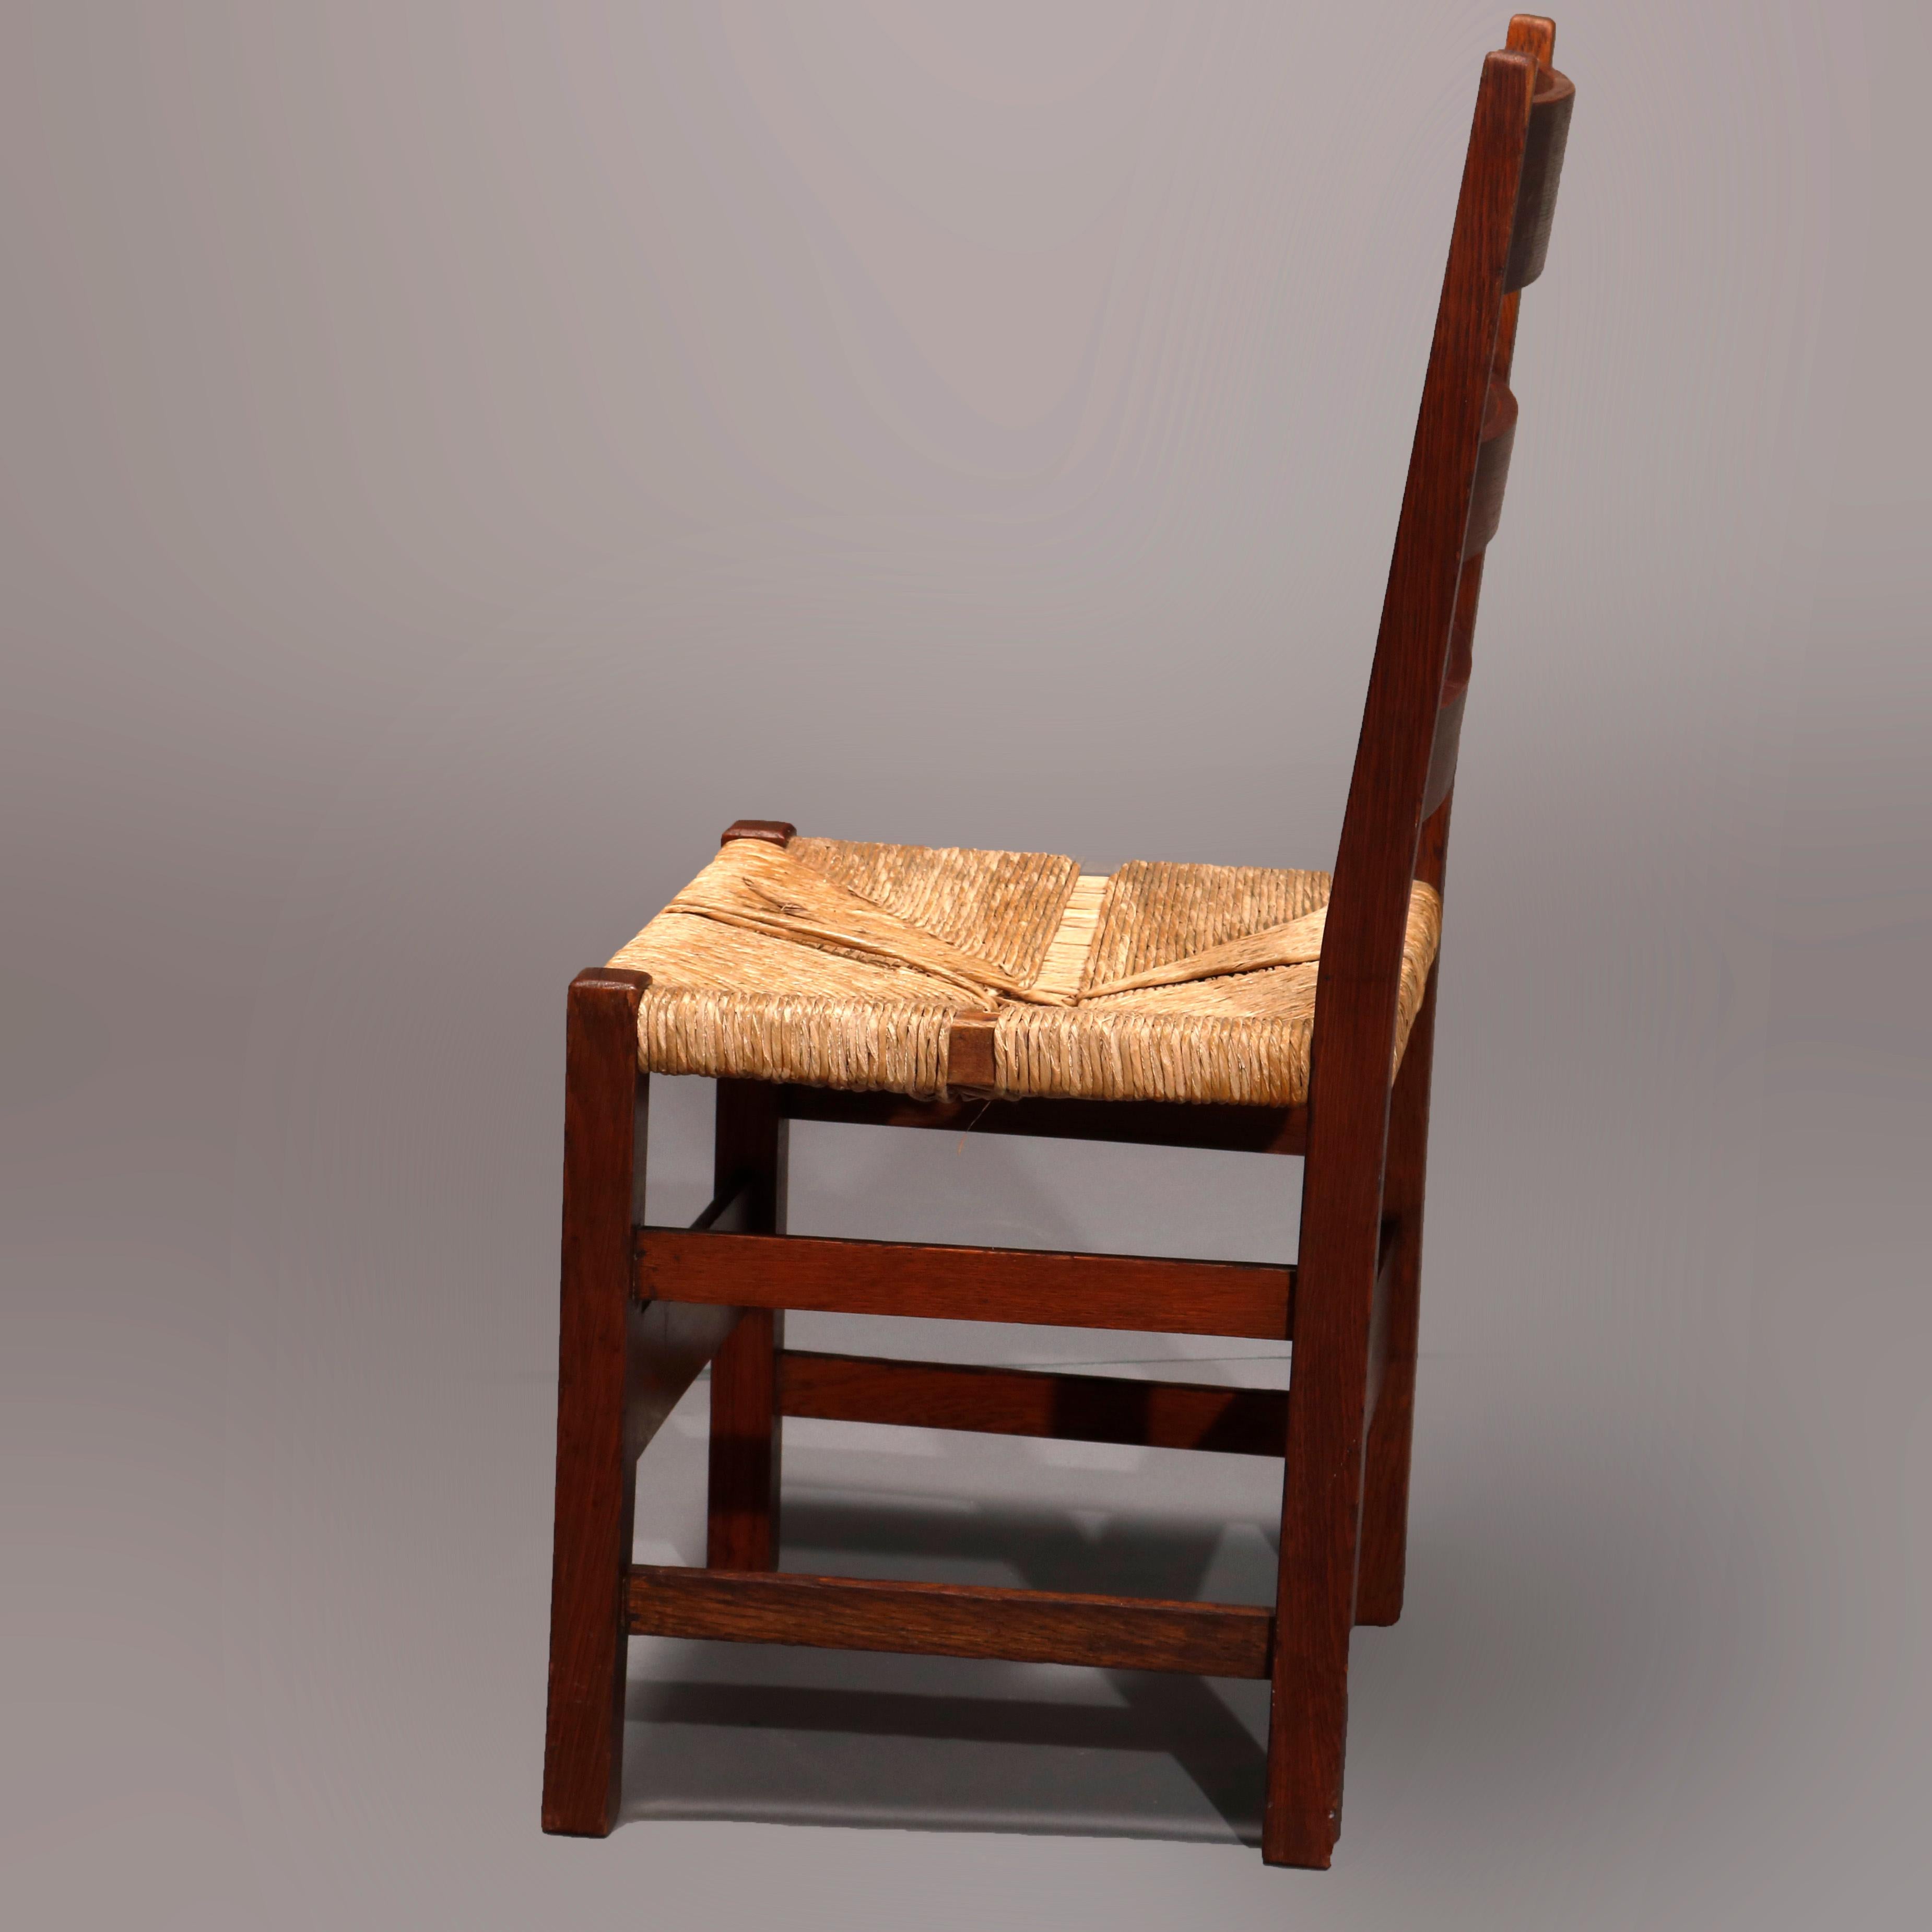 An antique Arts & Crafts Mission side chair by Gustav Stickley offers oak construction with ladder back surmounting rush seat raised on square and straight legs, circa 1910.

Measures: 34.25